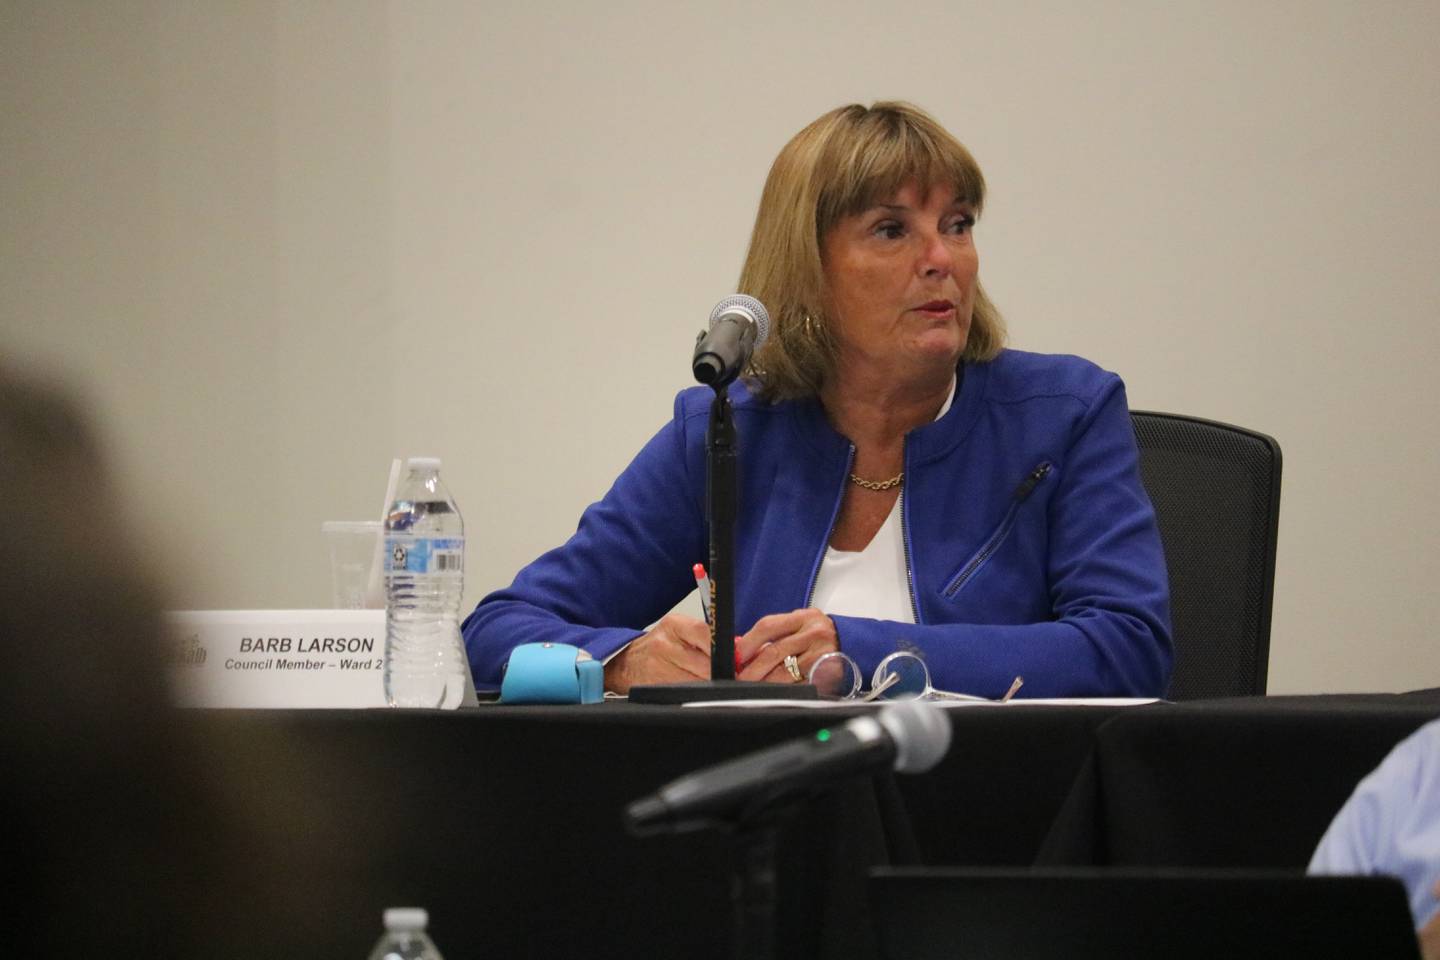 Second Ward Alderwoman Barb Larson gives comments at the Monday, Sept. 26 meeting of the DeKalb City Council.